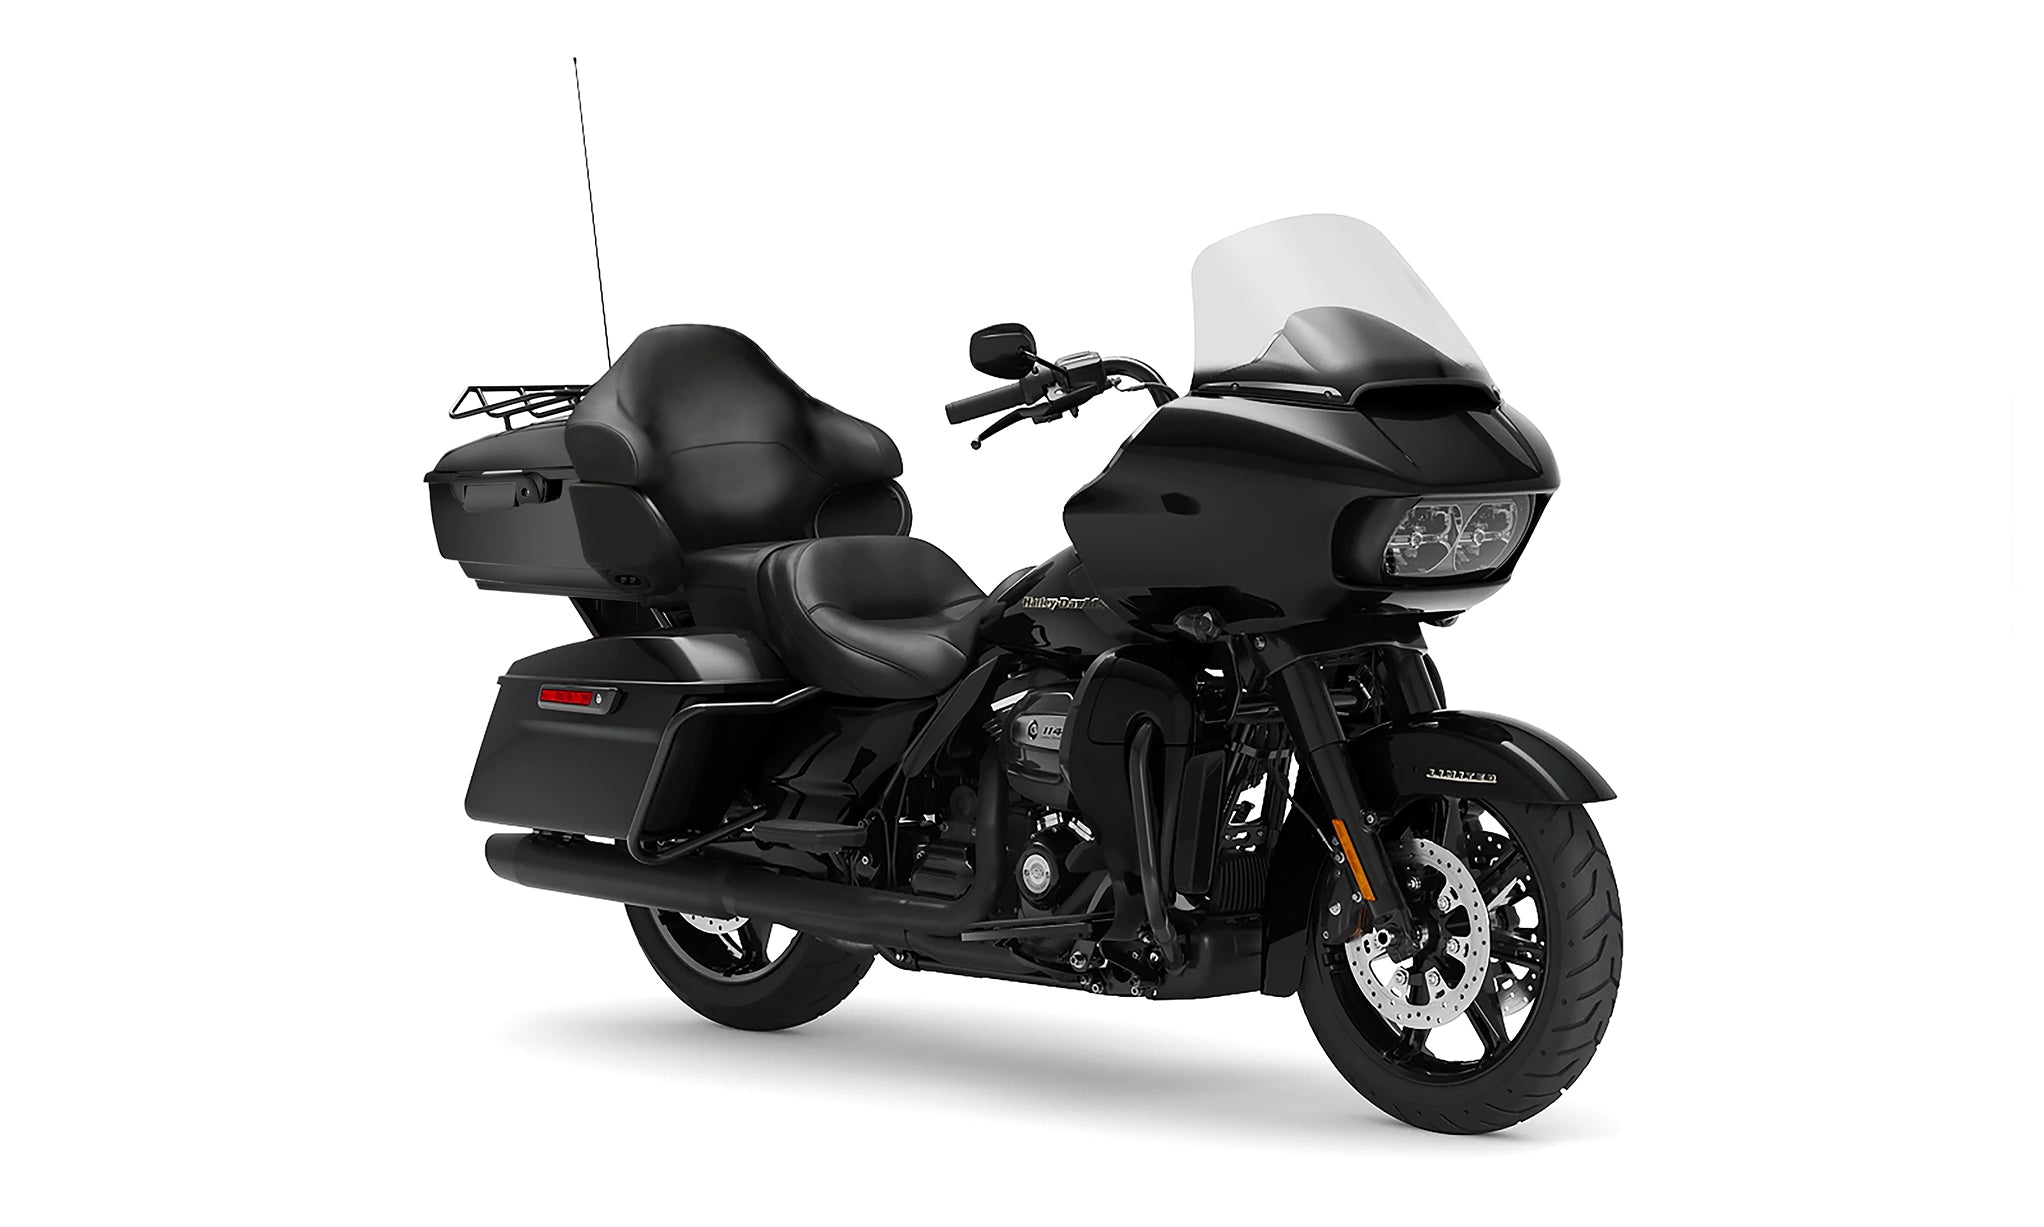 Viking Premium Tour Pack Backrest Pad For Harley Road King Bag on Bike View @expand